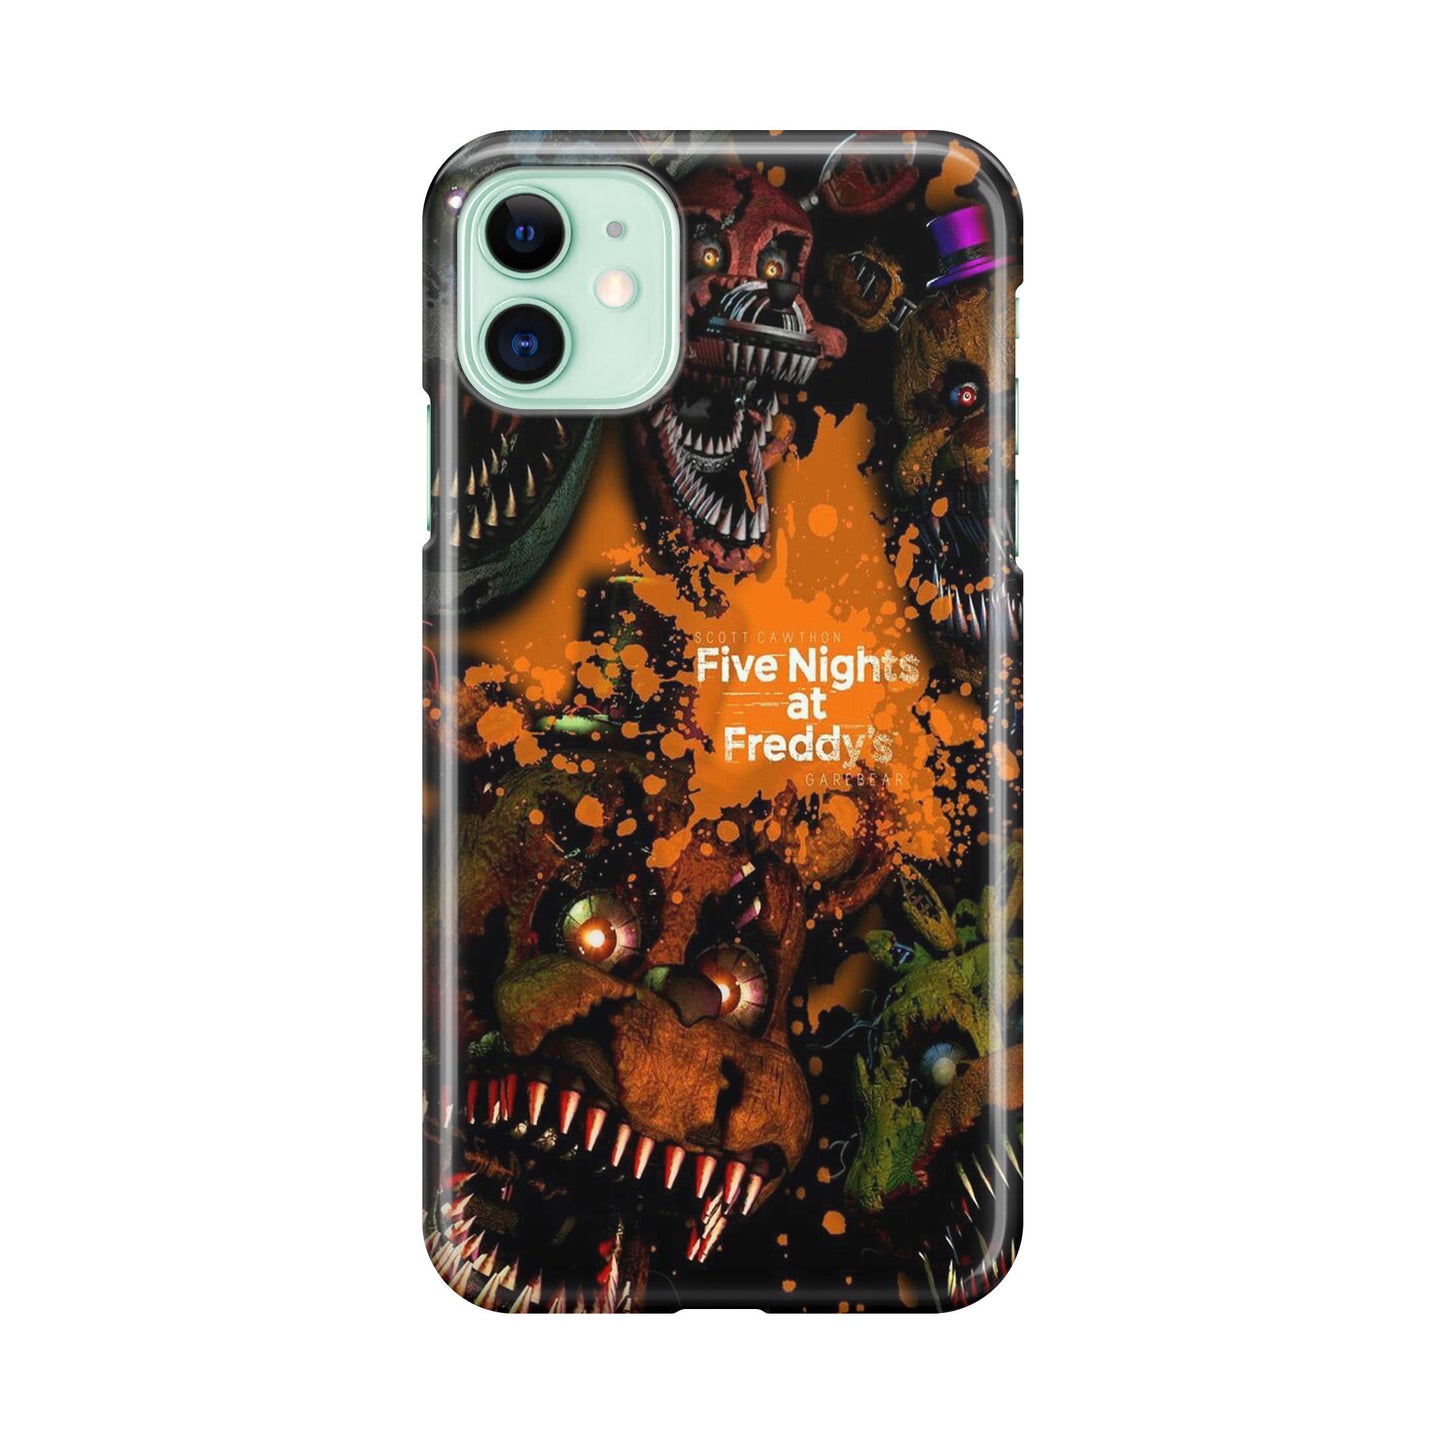 Five Nights at Freddy's Scary iPhone 12 mini Case